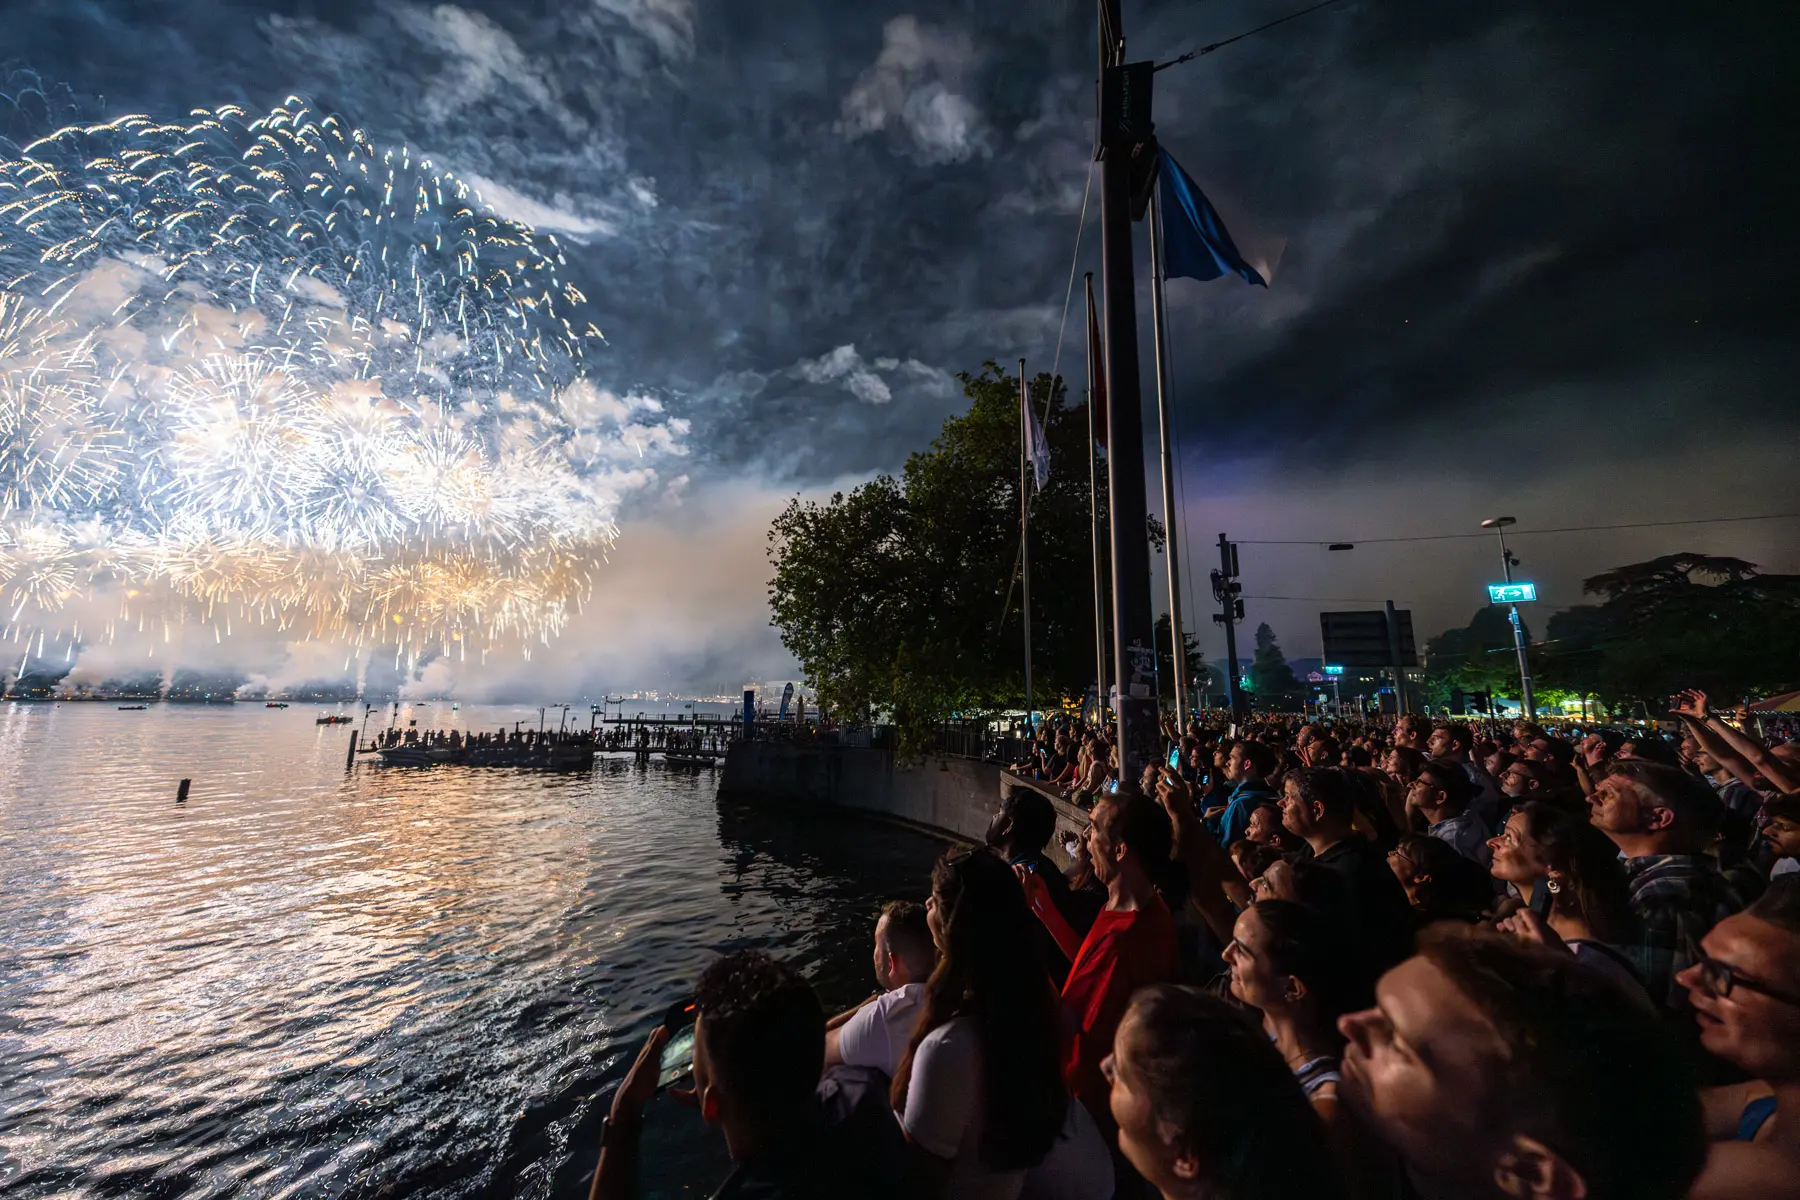 a crowd of people watching fireworks over water